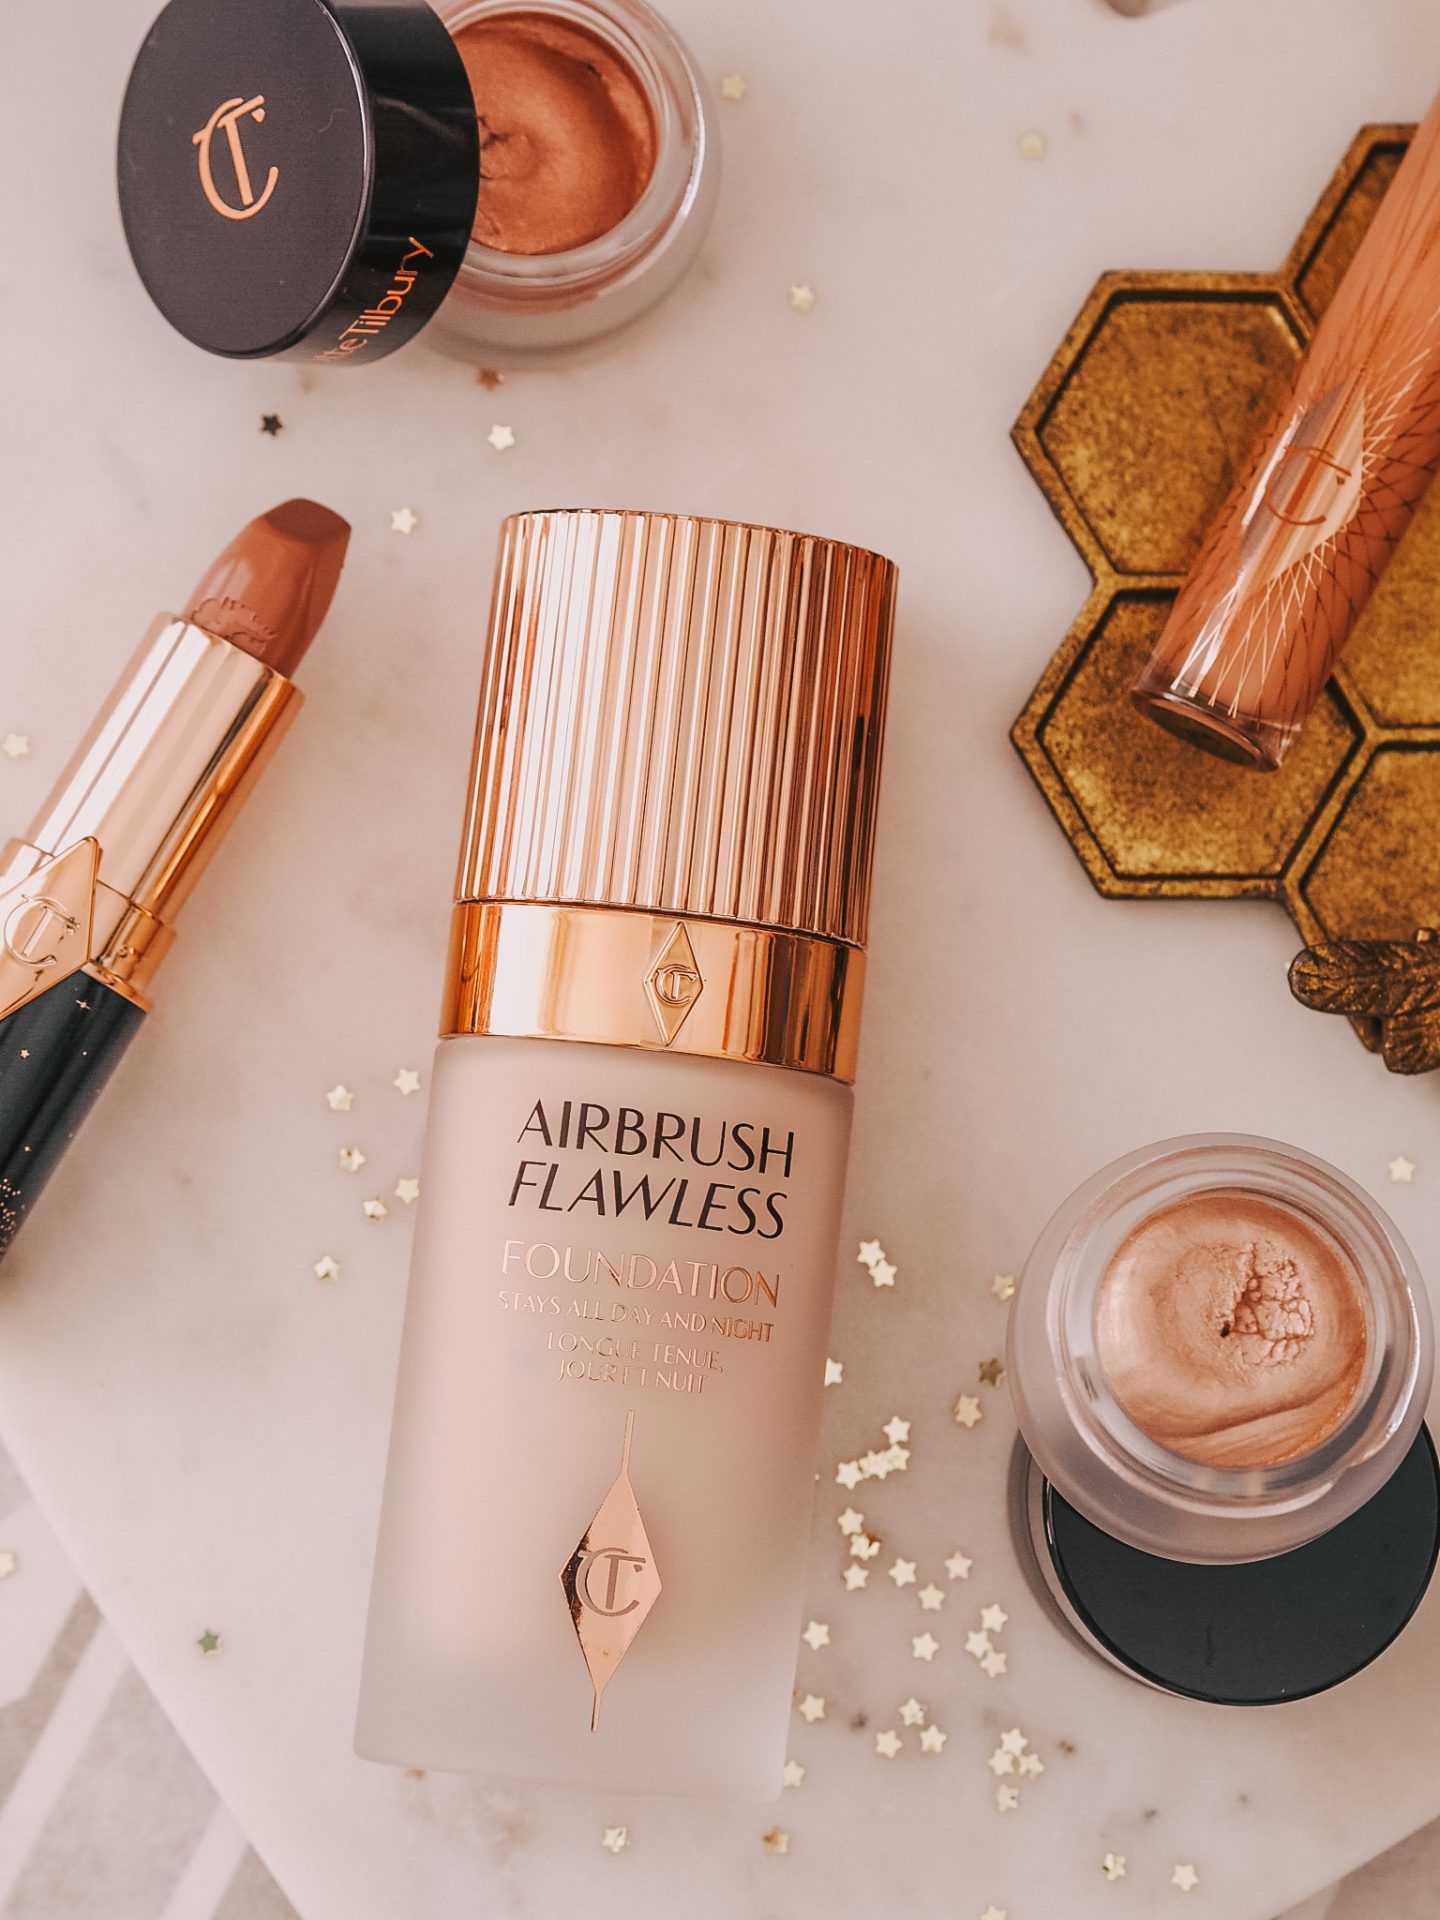 Charlotte Tilbury Airbrush Flawless Foundation Review